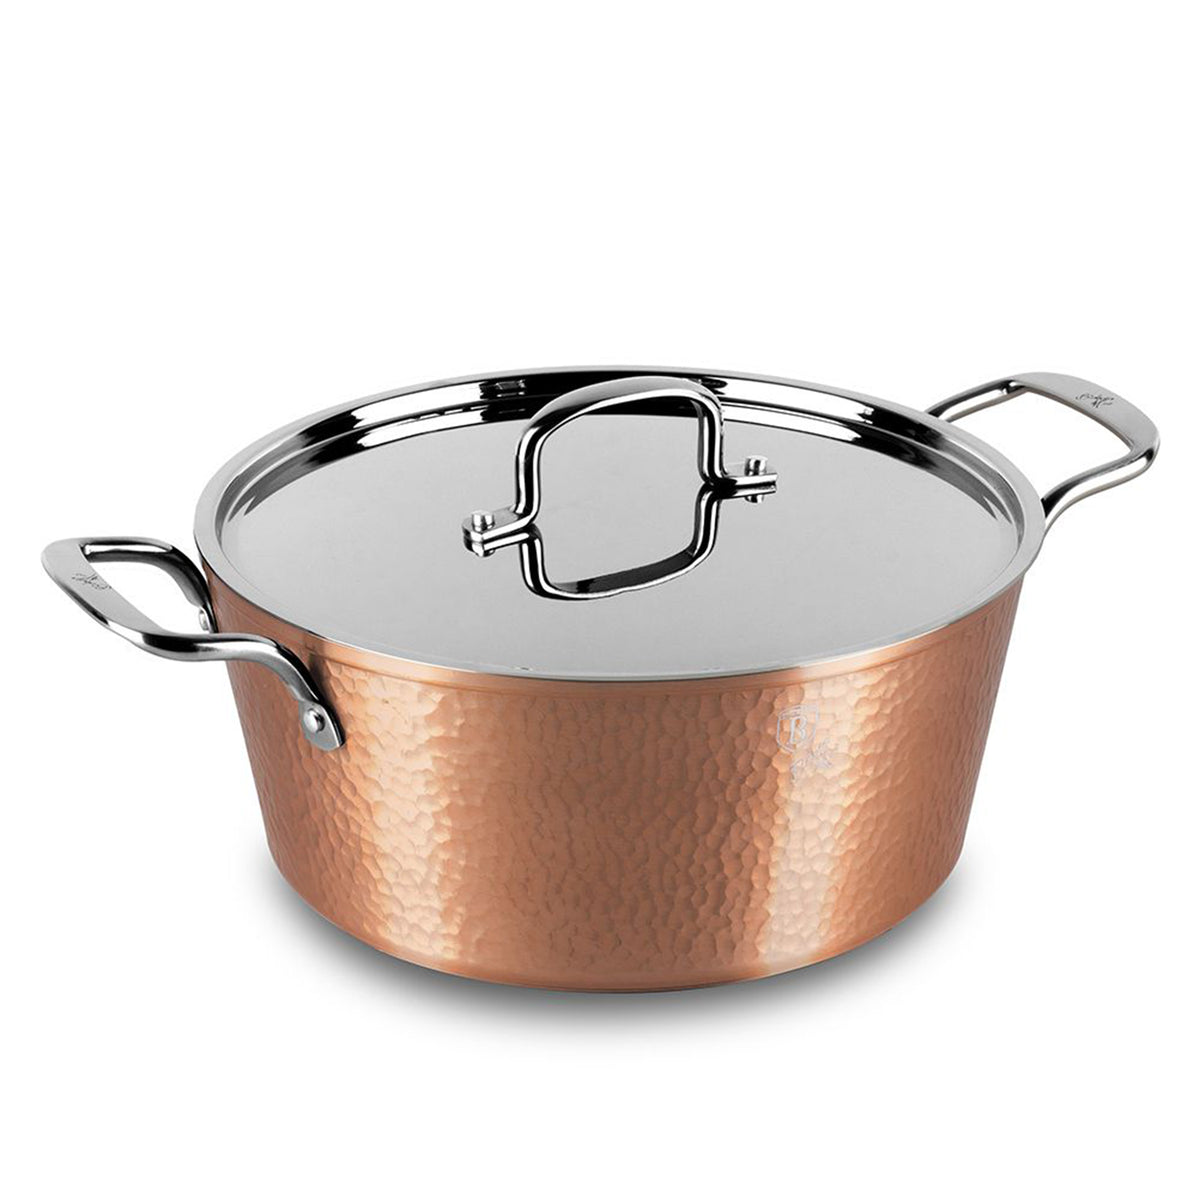 Hammered casserole with stainless steel lid and handles size 32 cm copper color